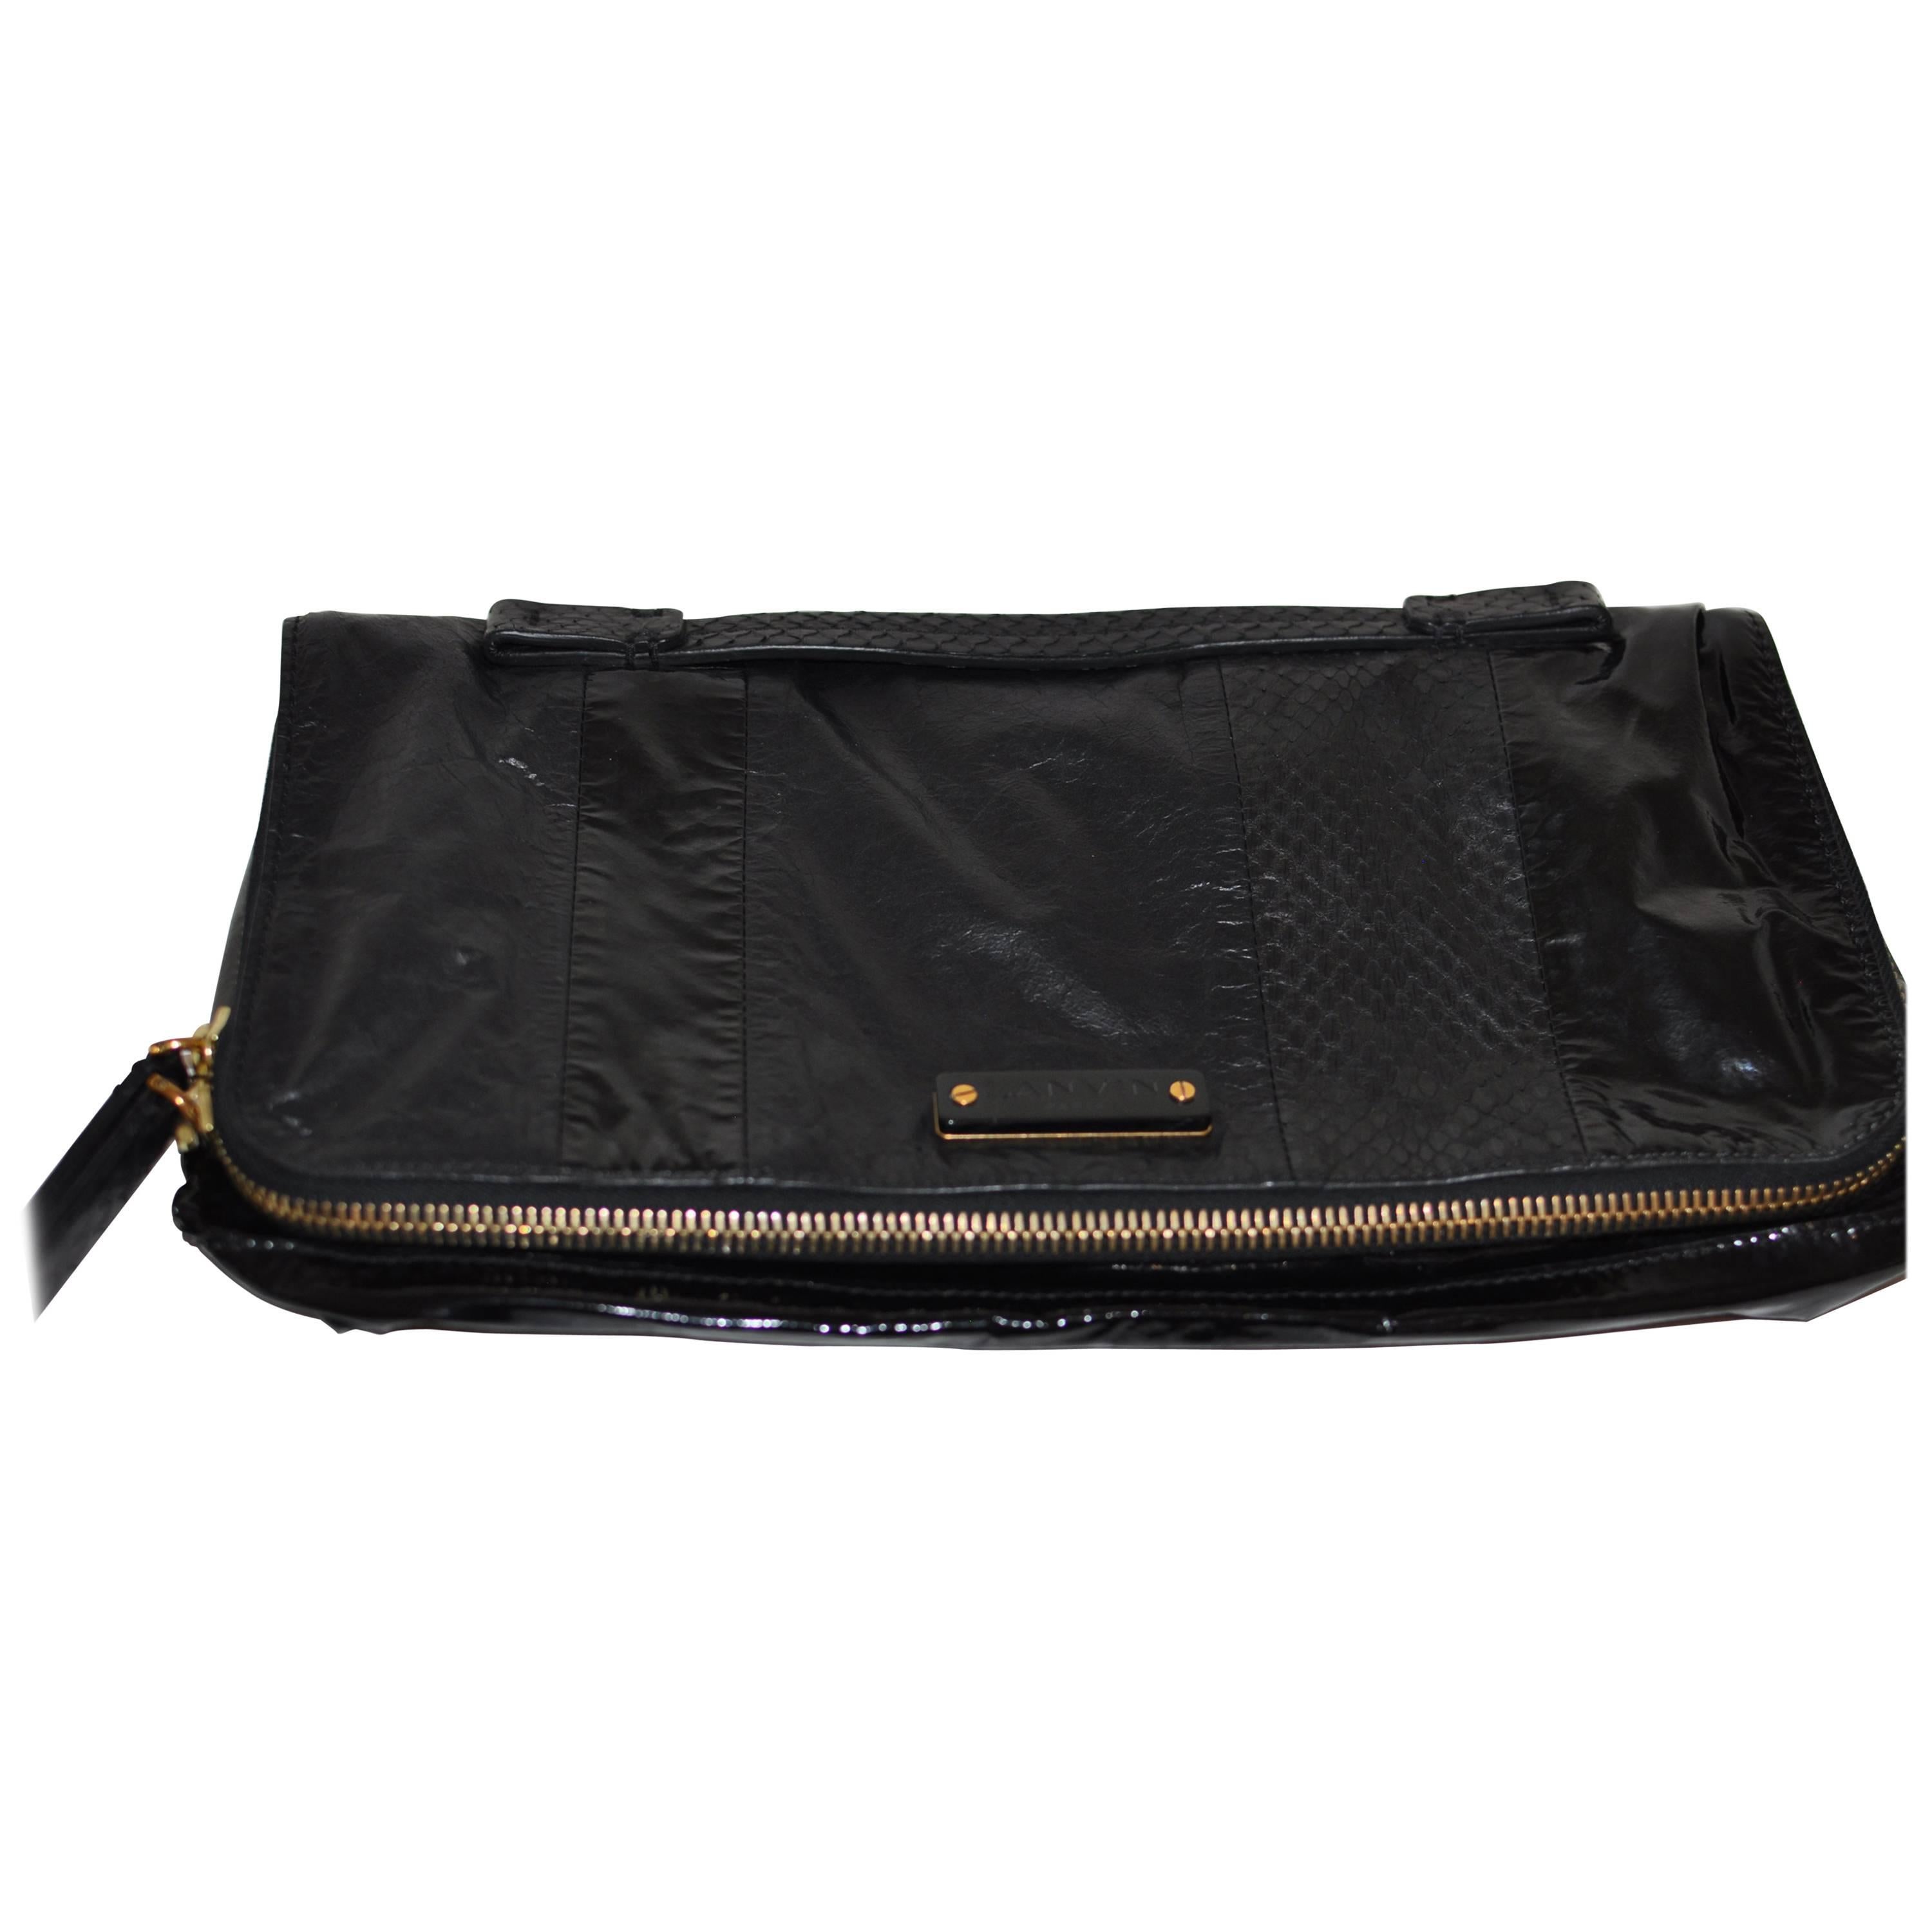 Lanvin Black Patent Leather and Reptile Foldover Flap Clutch with Dust Bag 41402